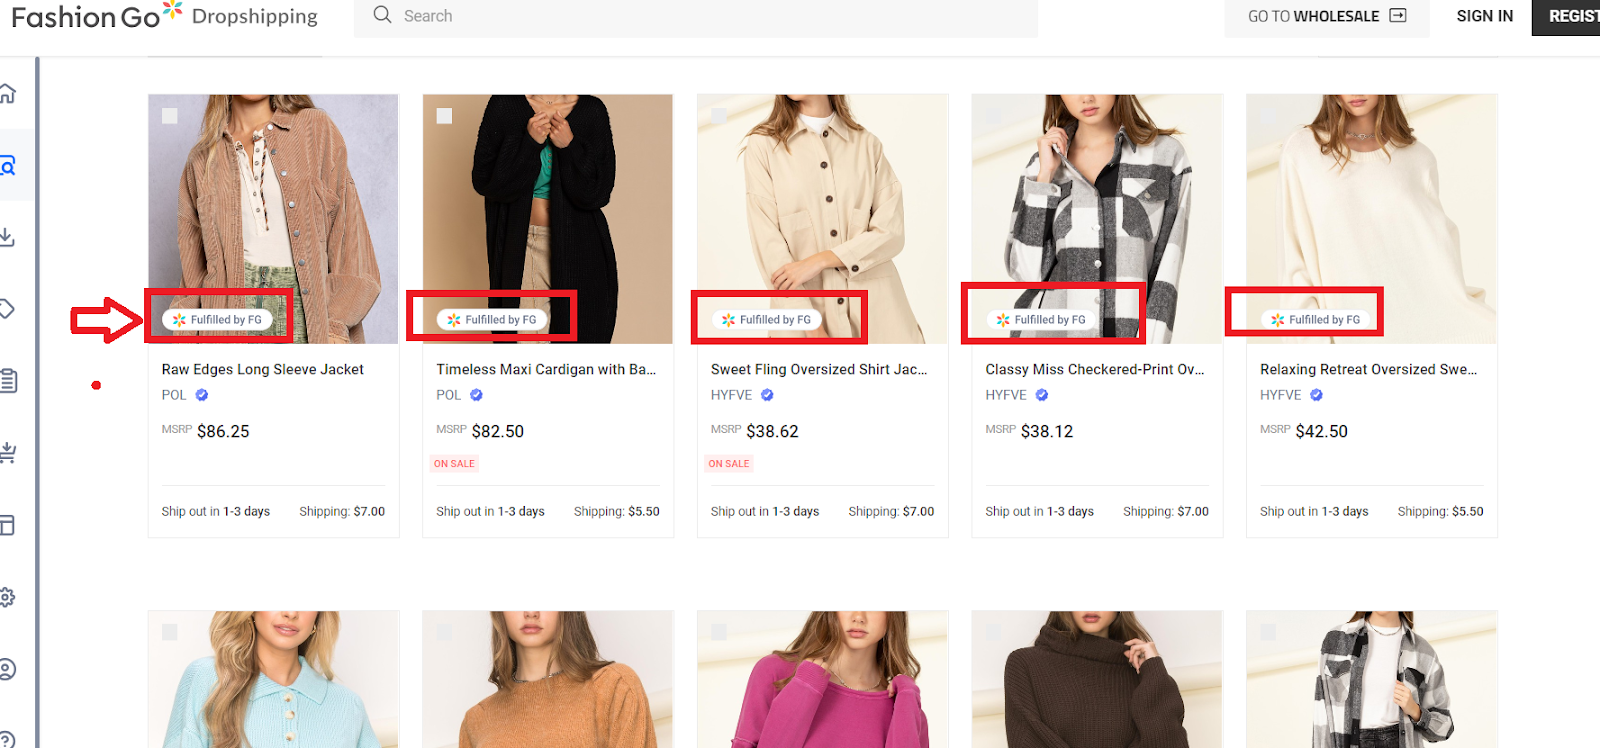 FashionGo Review: Is This the Future of Fashion Dropshipping?